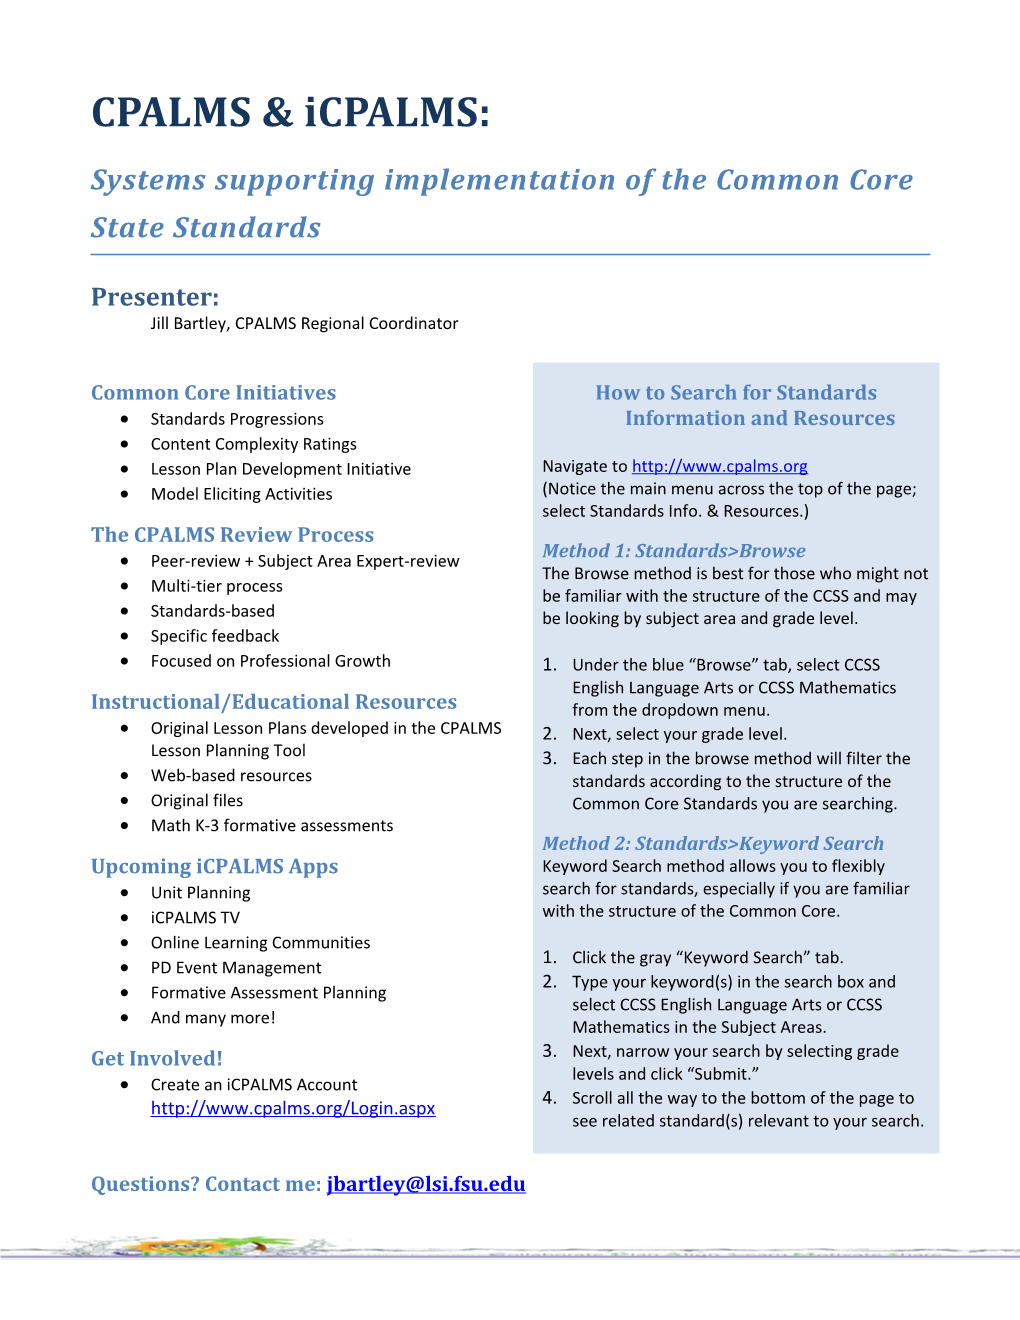 Systems Supporting Implementation of the Common Core State Standards